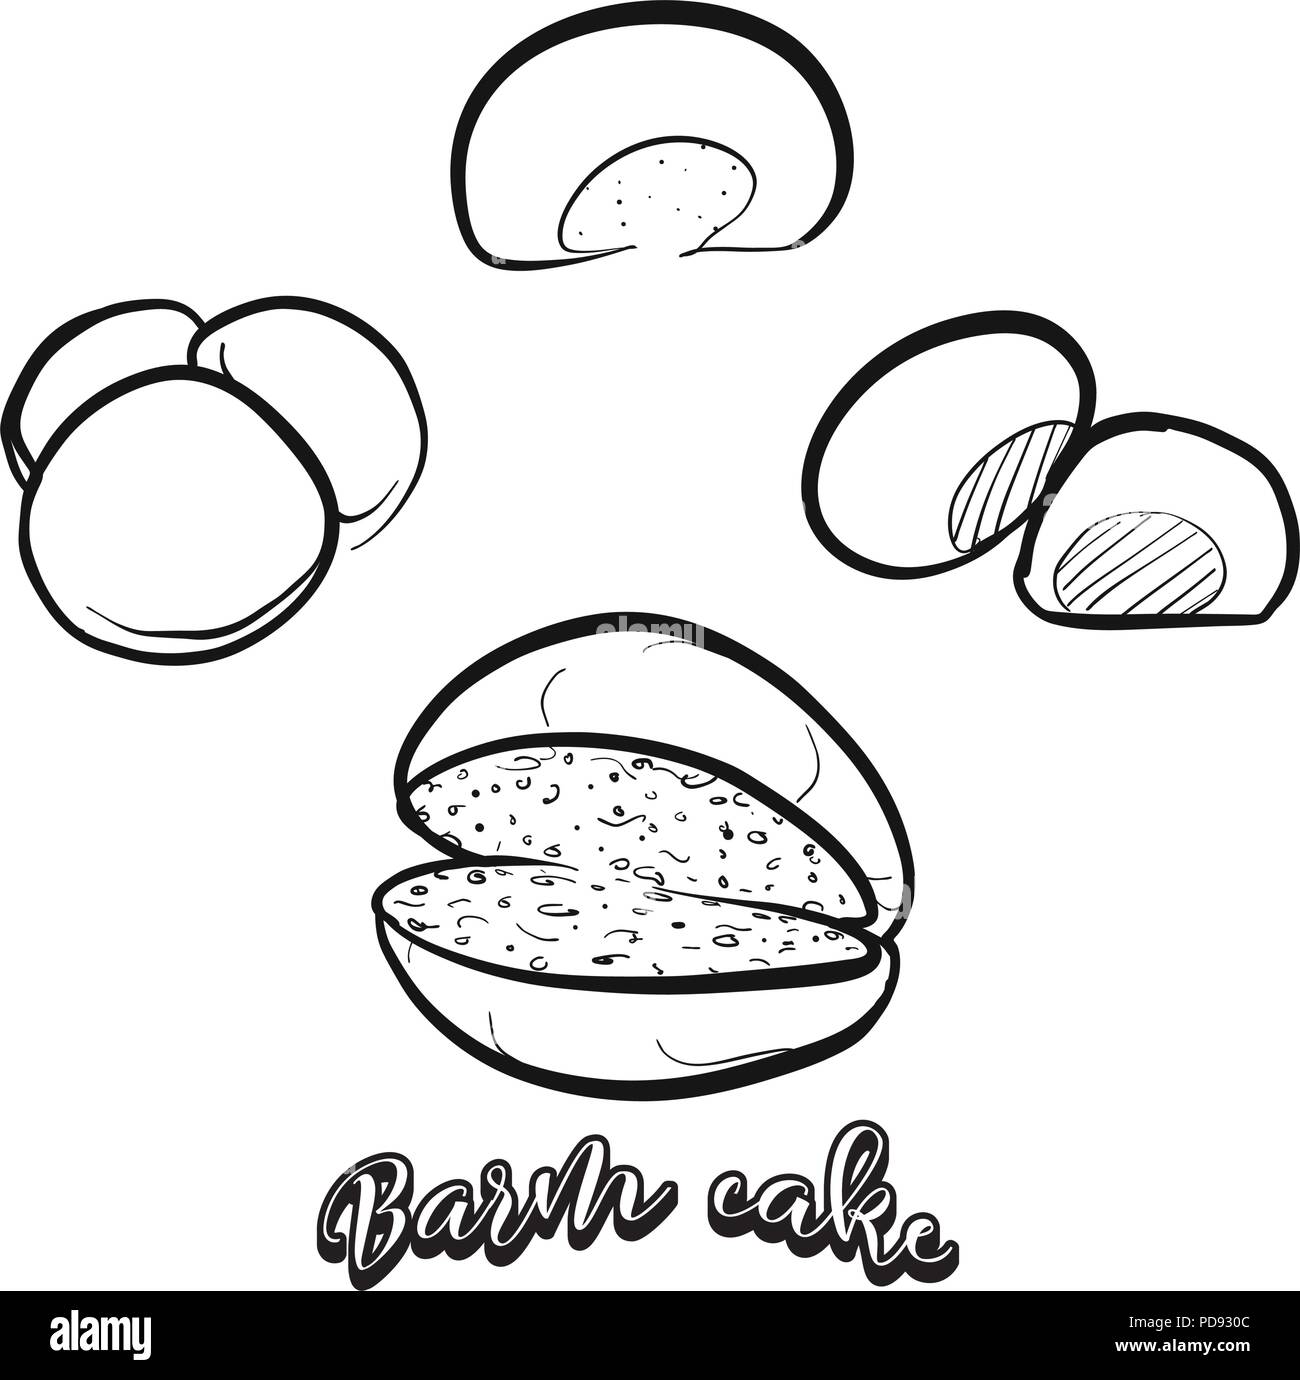 Hand drawn sketch of Barm cake bread. Vector drawing of Yeast bread food, usually known in Lancashire. Bread illustration series. Stock Vector